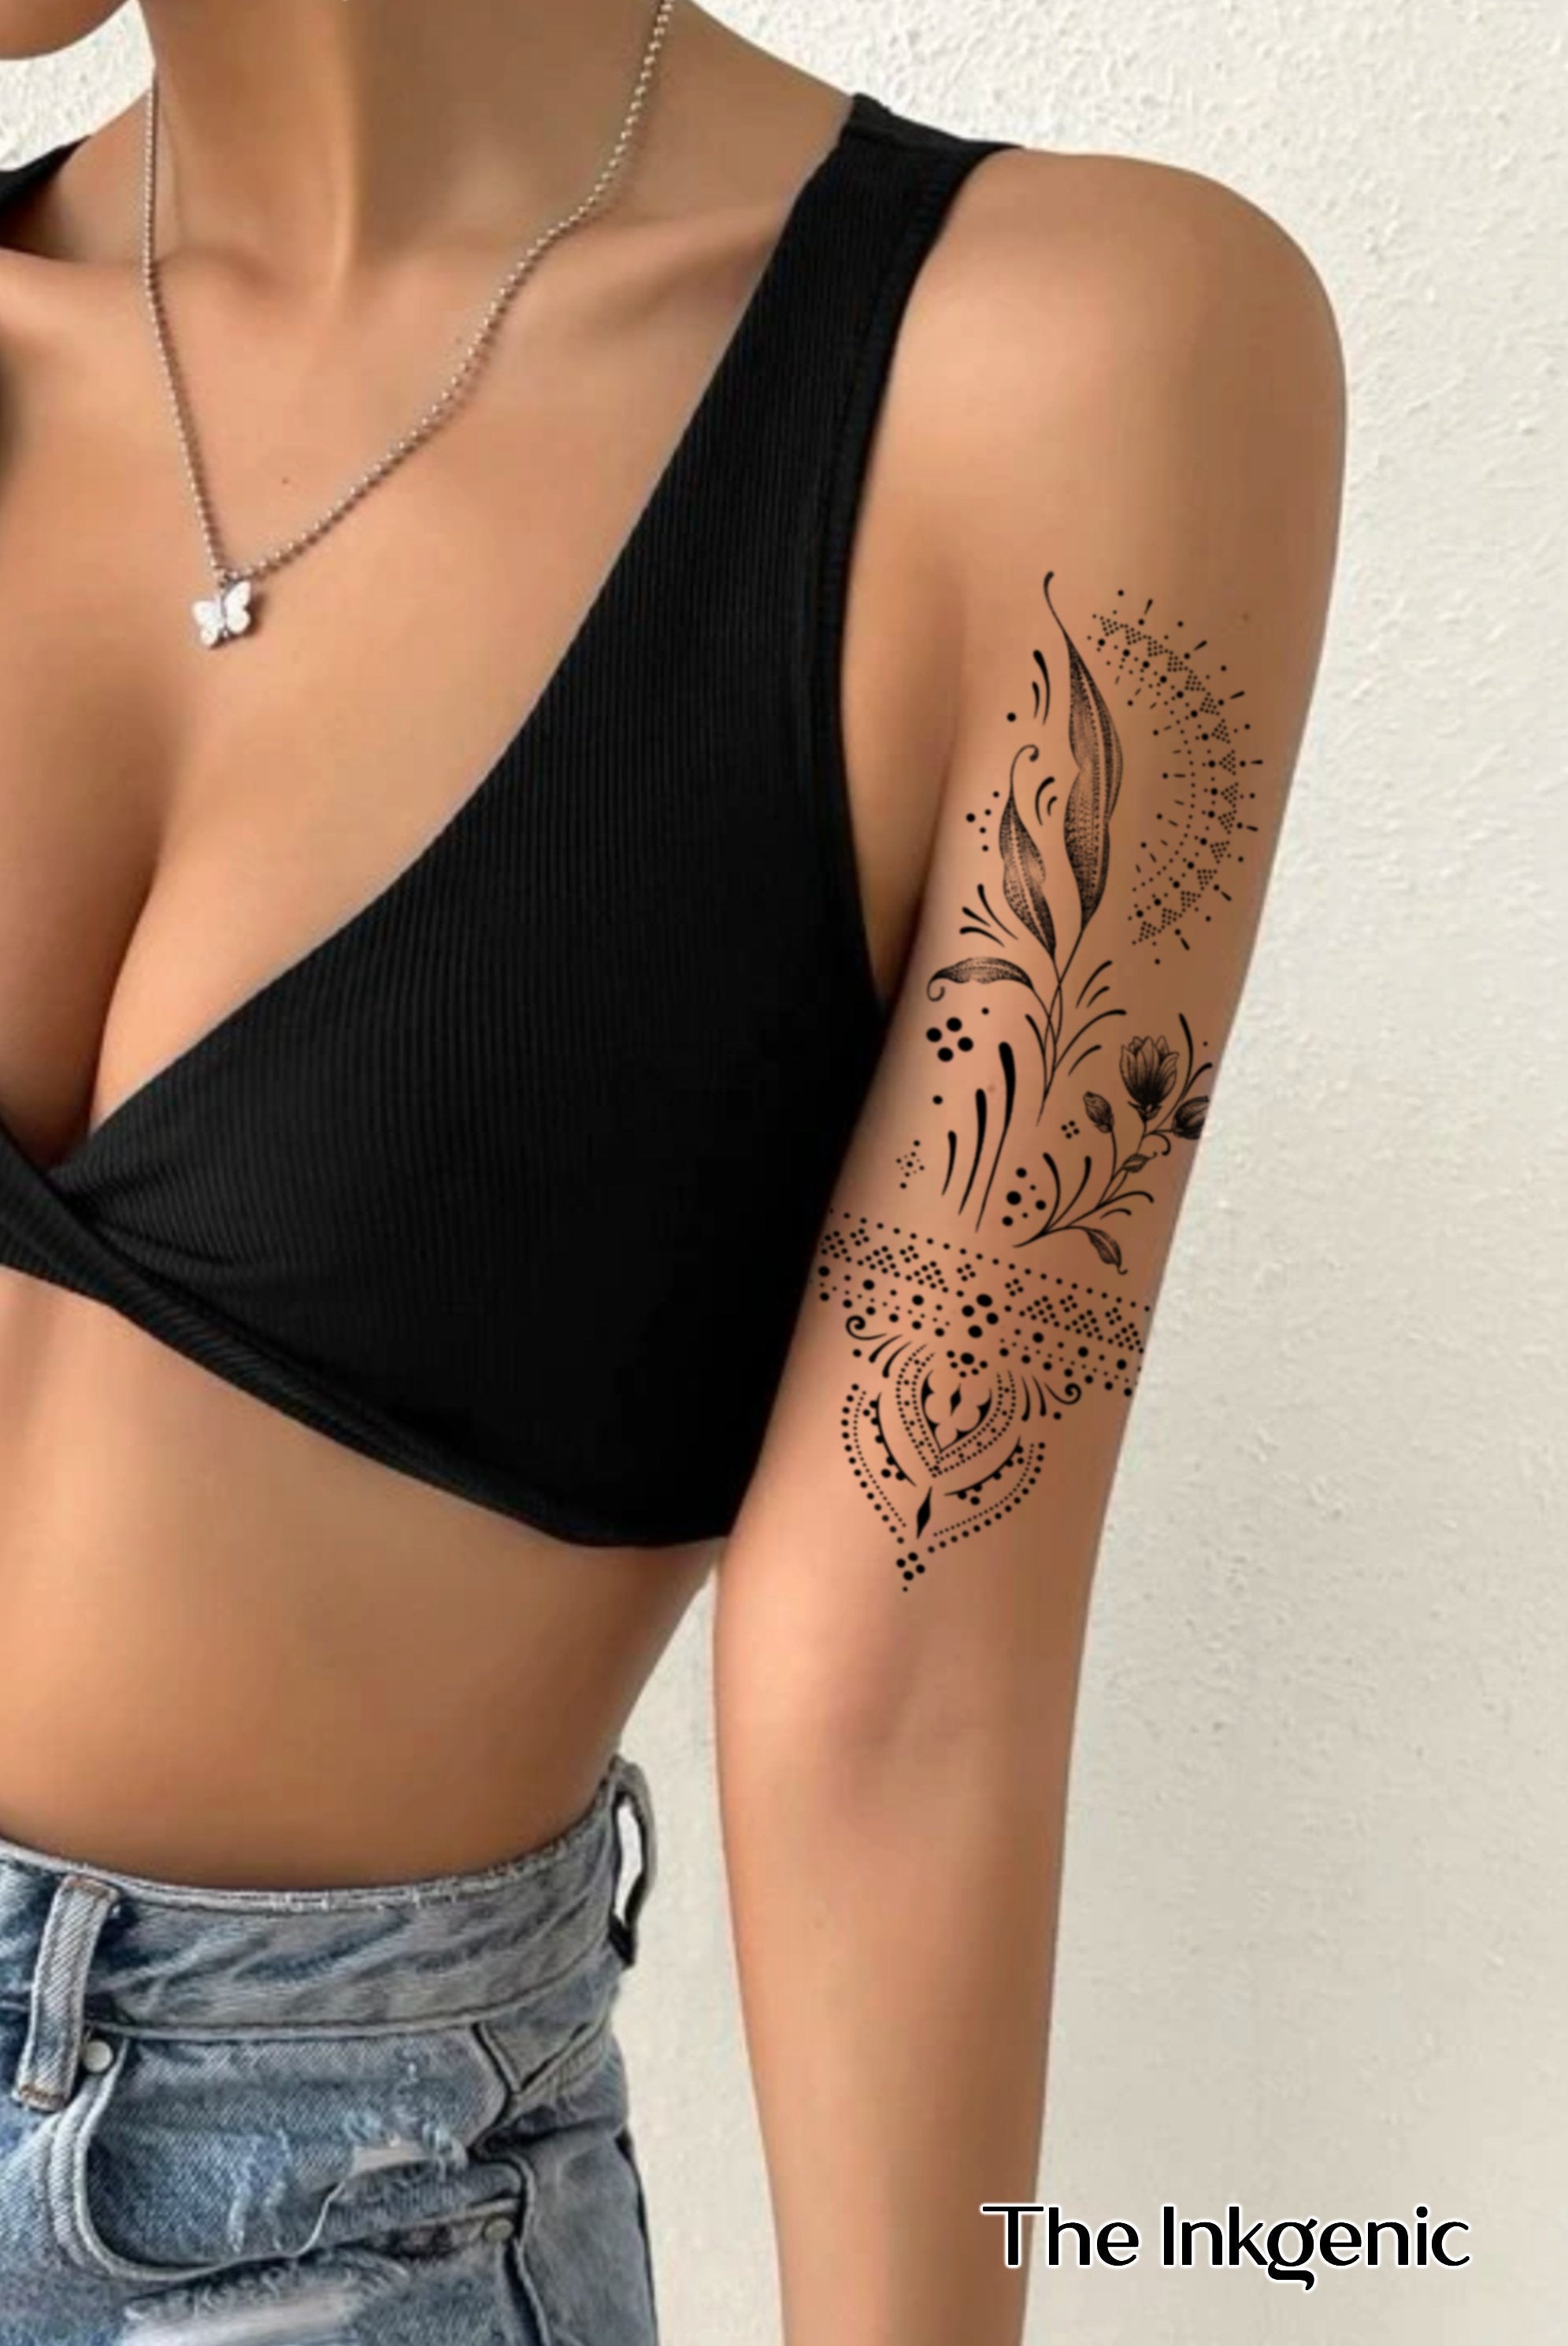 Dark Flower Temporary Tattoo Female Waterproof Sexy Gothic Clavicle Water  Transfer Art Fake Tattoos Arm Chest Tattoo Stickers From Soapsane, $8.13 |  DHgate.Com